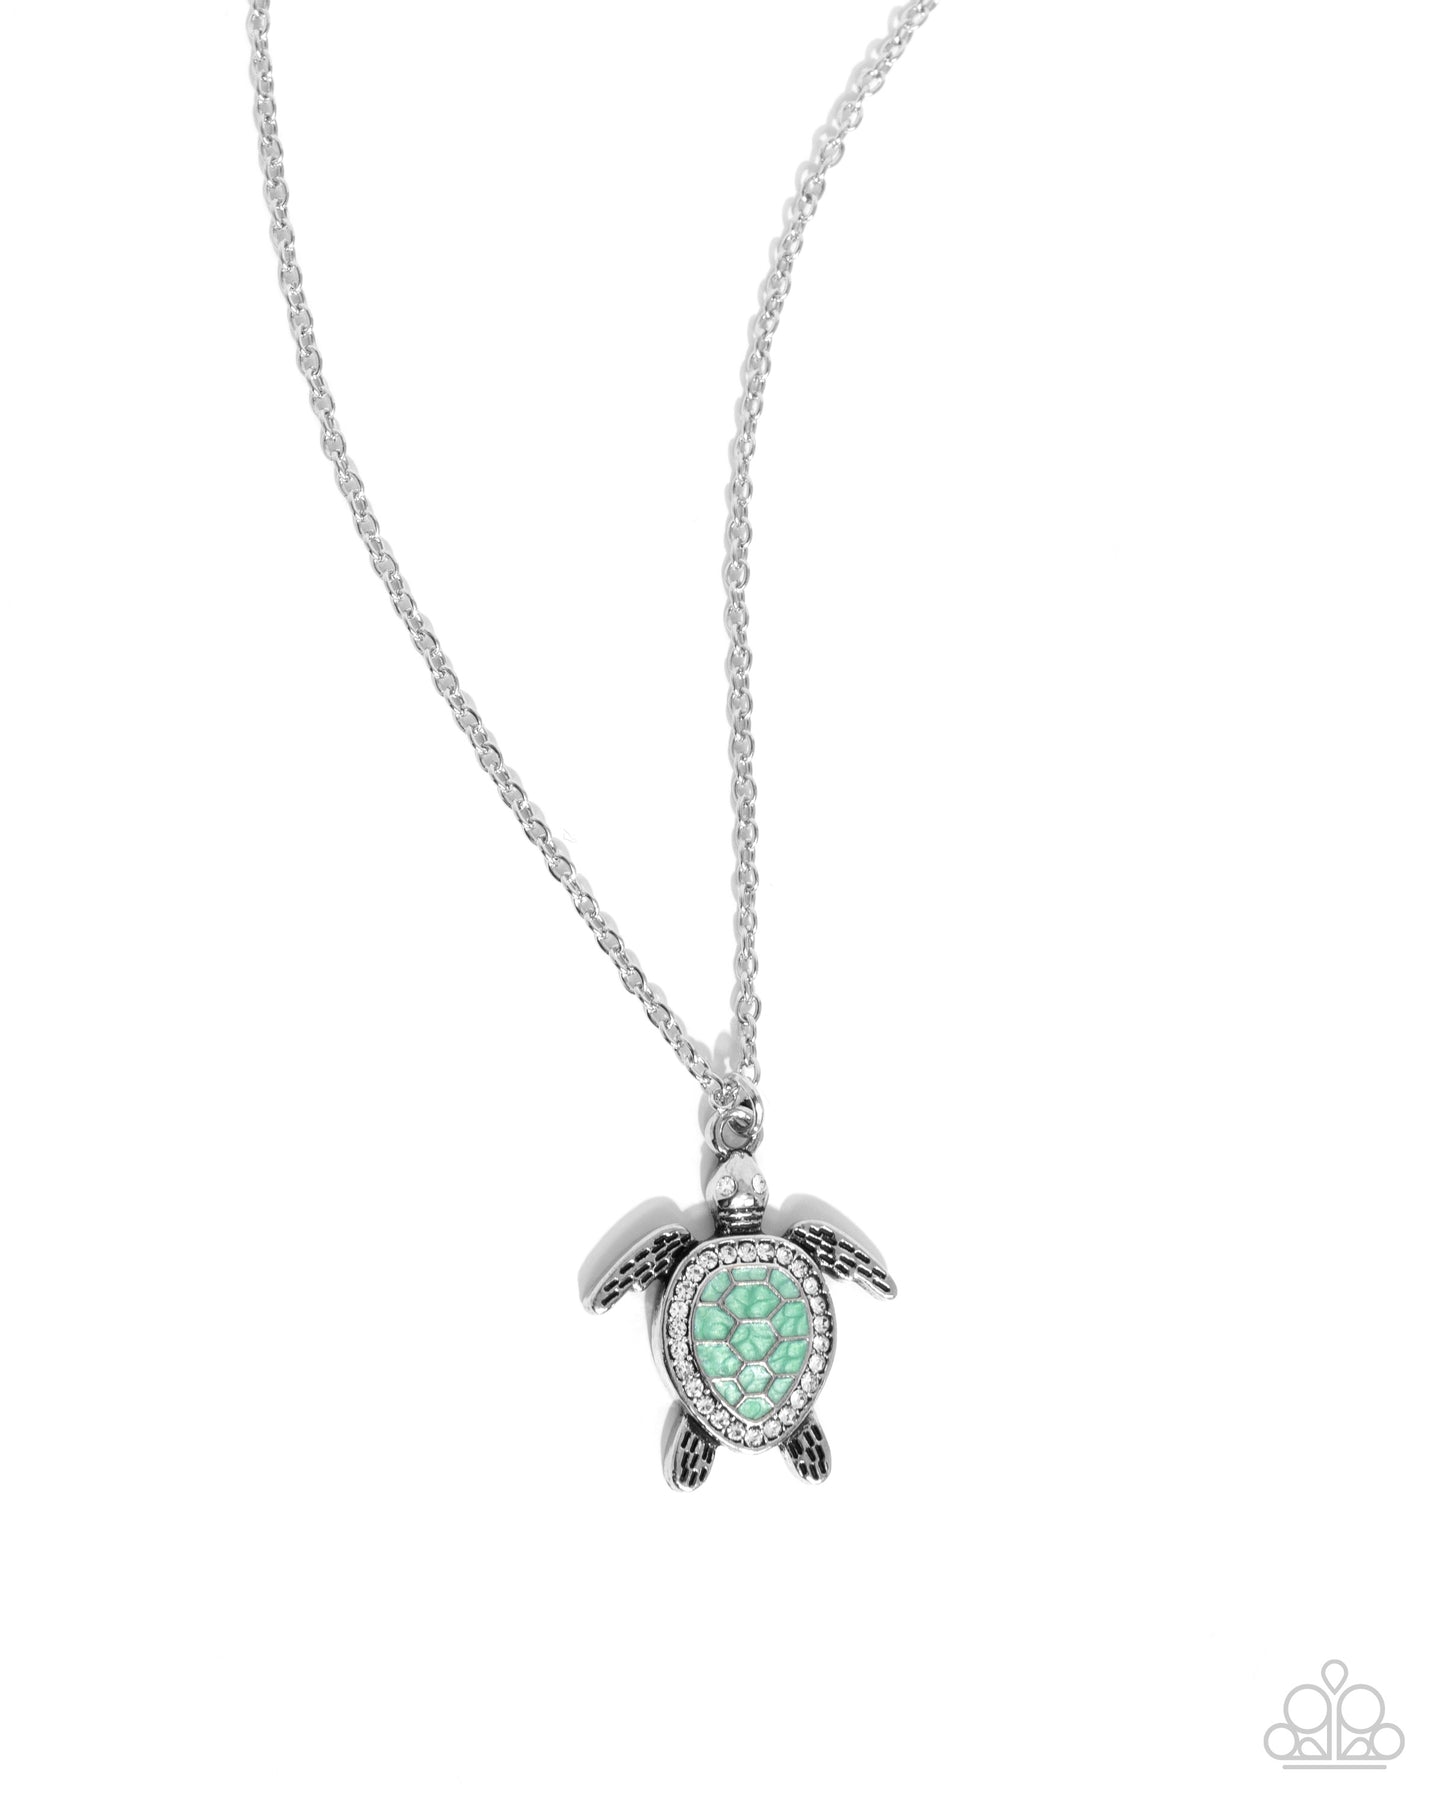 Turtle Tourist Green Necklace - Paparazzi Accessories  Swimming along a dainty silver chain, an oversized silver turtle pendant with a Grass Green pearl-painted and white rhinestone embellished shell and eyes shimmers below the neckline for a classic, coastal look. Features an adjustable clasp closure.  Sold as one individual necklace. Includes one pair of matching earrings.  SKU: P2DA-GRXX-132XX